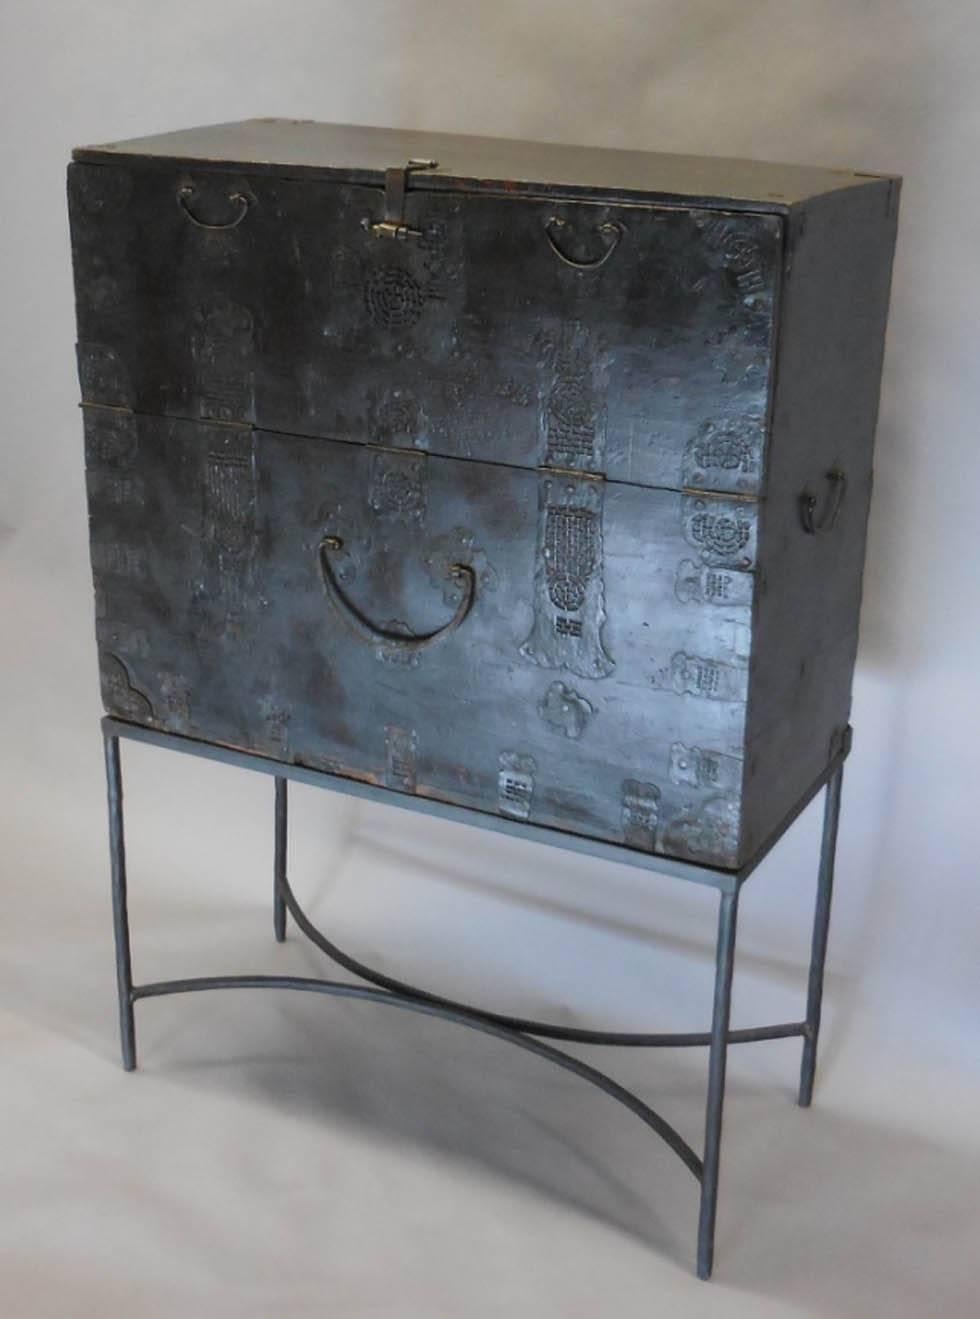 Pair of 18th Century Korean Chests.   Intricate metal cutout work decorates the pieces.  Some metal repairs have been made is the distant past. Top front panel drops down for storage.  Primitive, modern decorative pieces atop custom metal bases. The